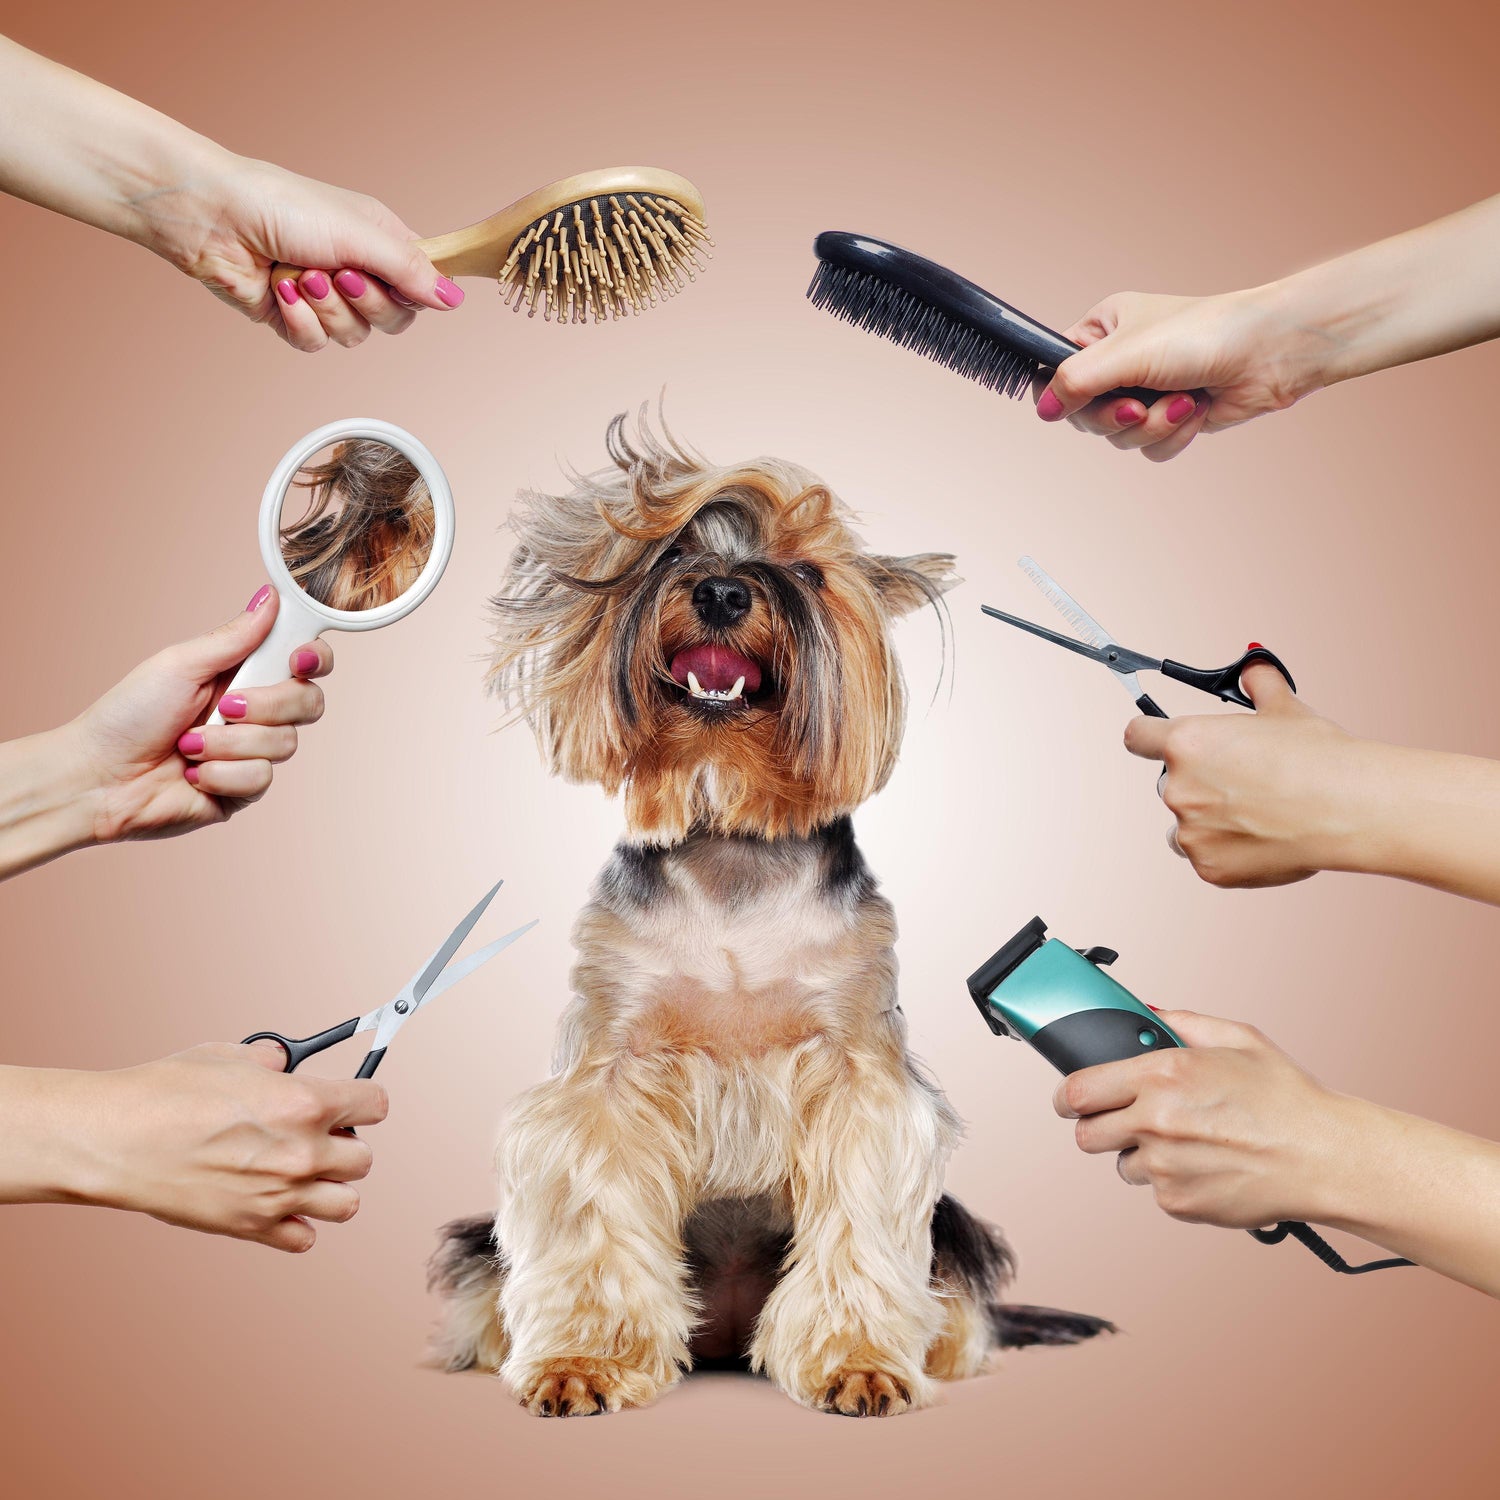 The Guide to Grooming Your Dog at Home: Products and Tips